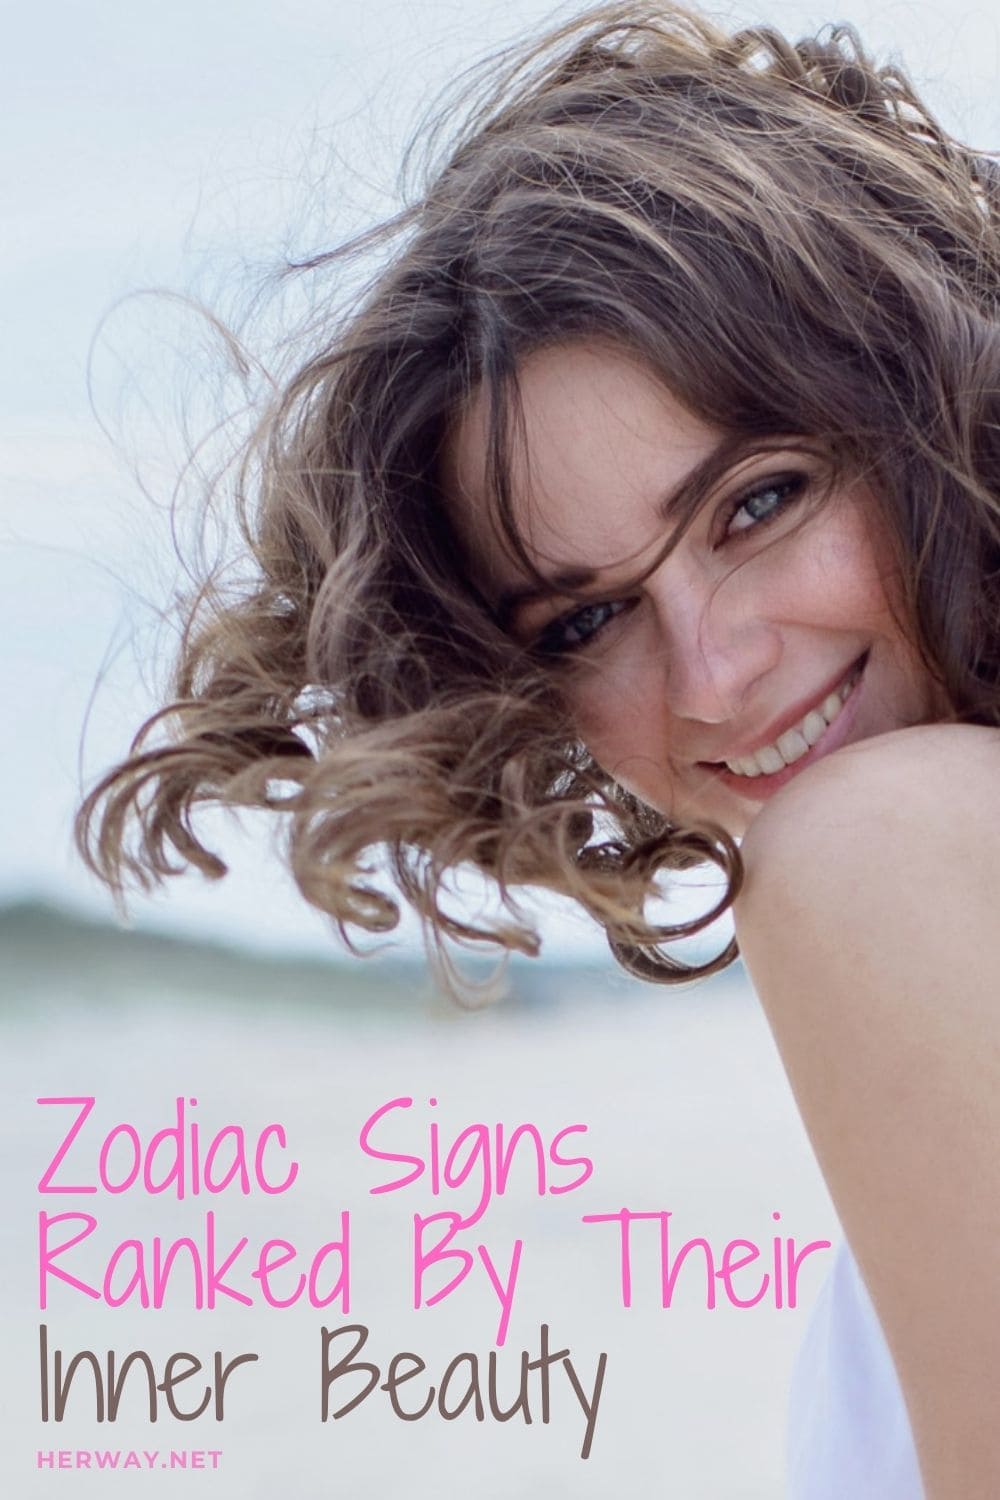 Zodiac Signs Ranked By Their Inner Beauty